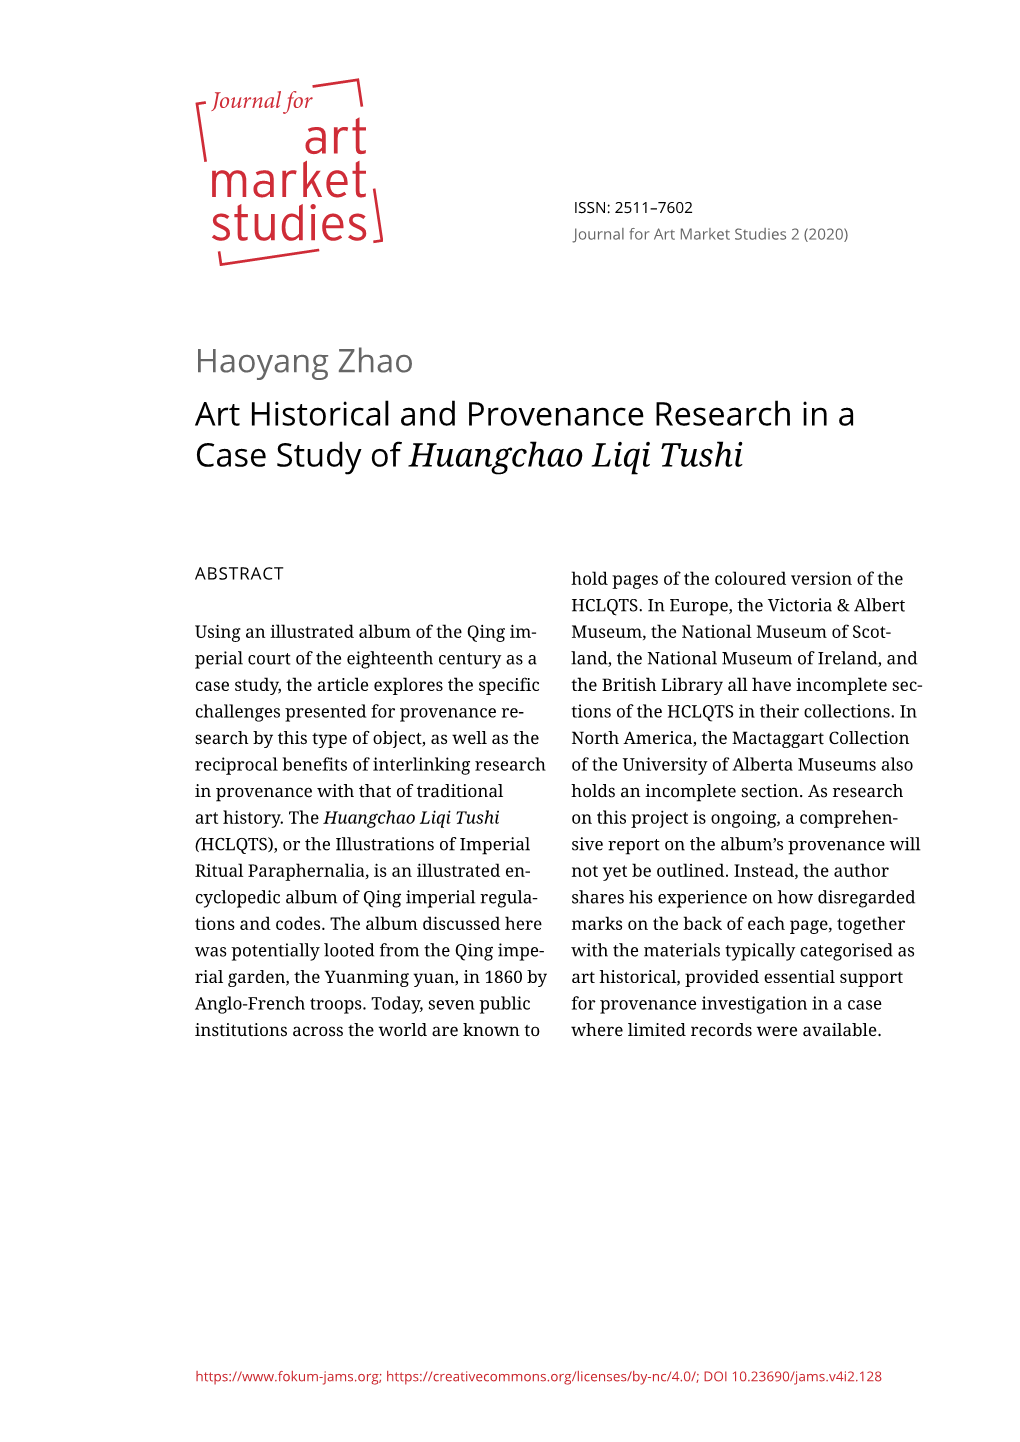 Haoyang Zhao Art Historical and Provenance Research in a Case Study of Huangchao Liqi Tushi